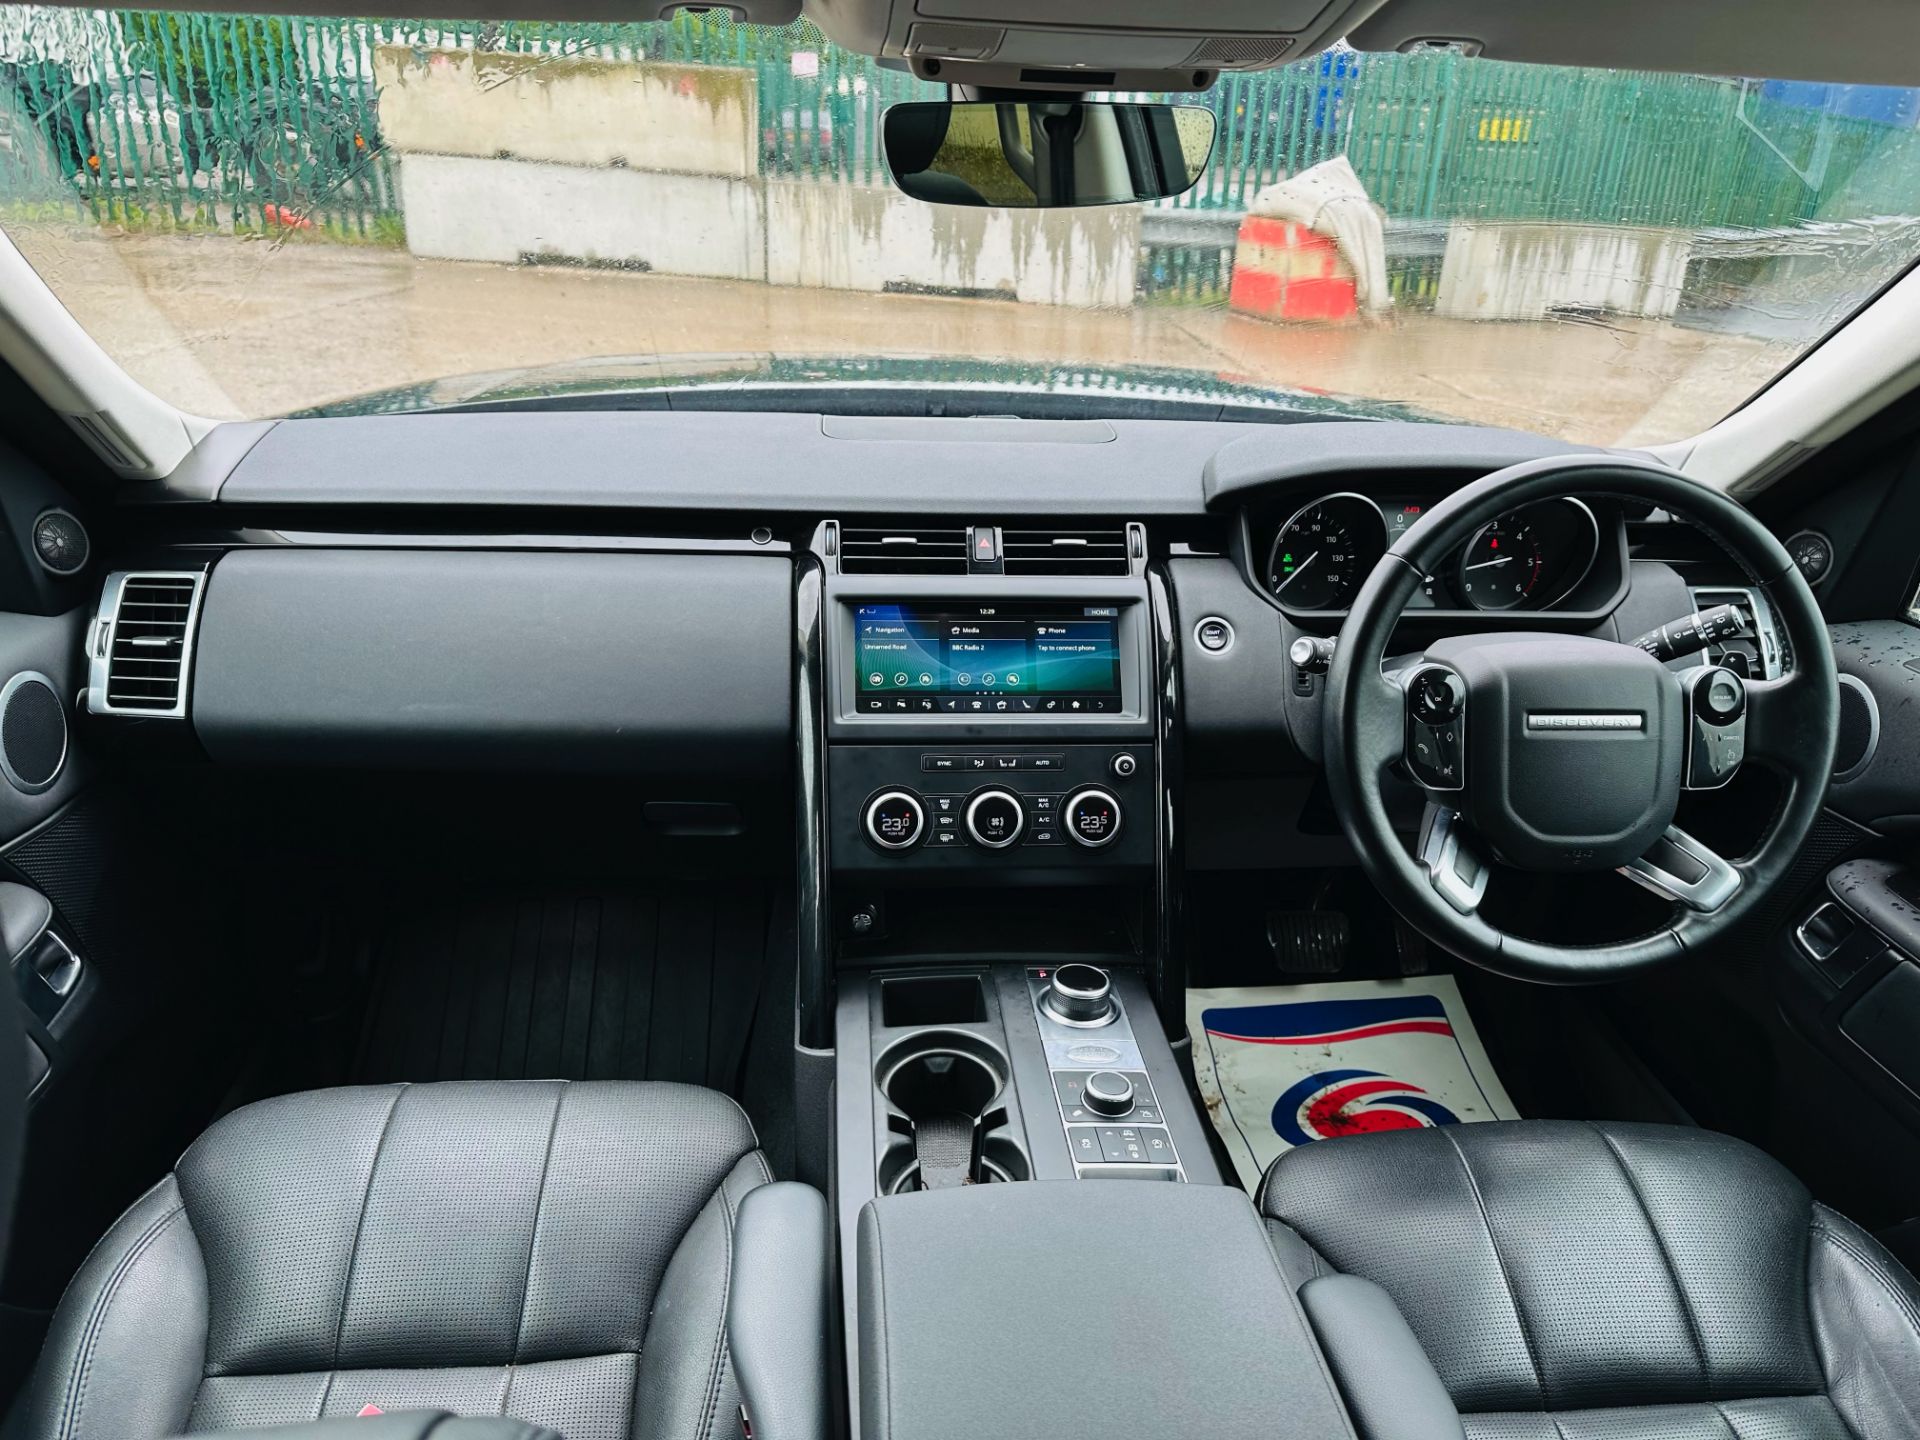 (Reserve Met) Land Rover Discovery SE Automatic (Black Edition) - 2020 Model - Only 57k Miles! - Image 20 of 40